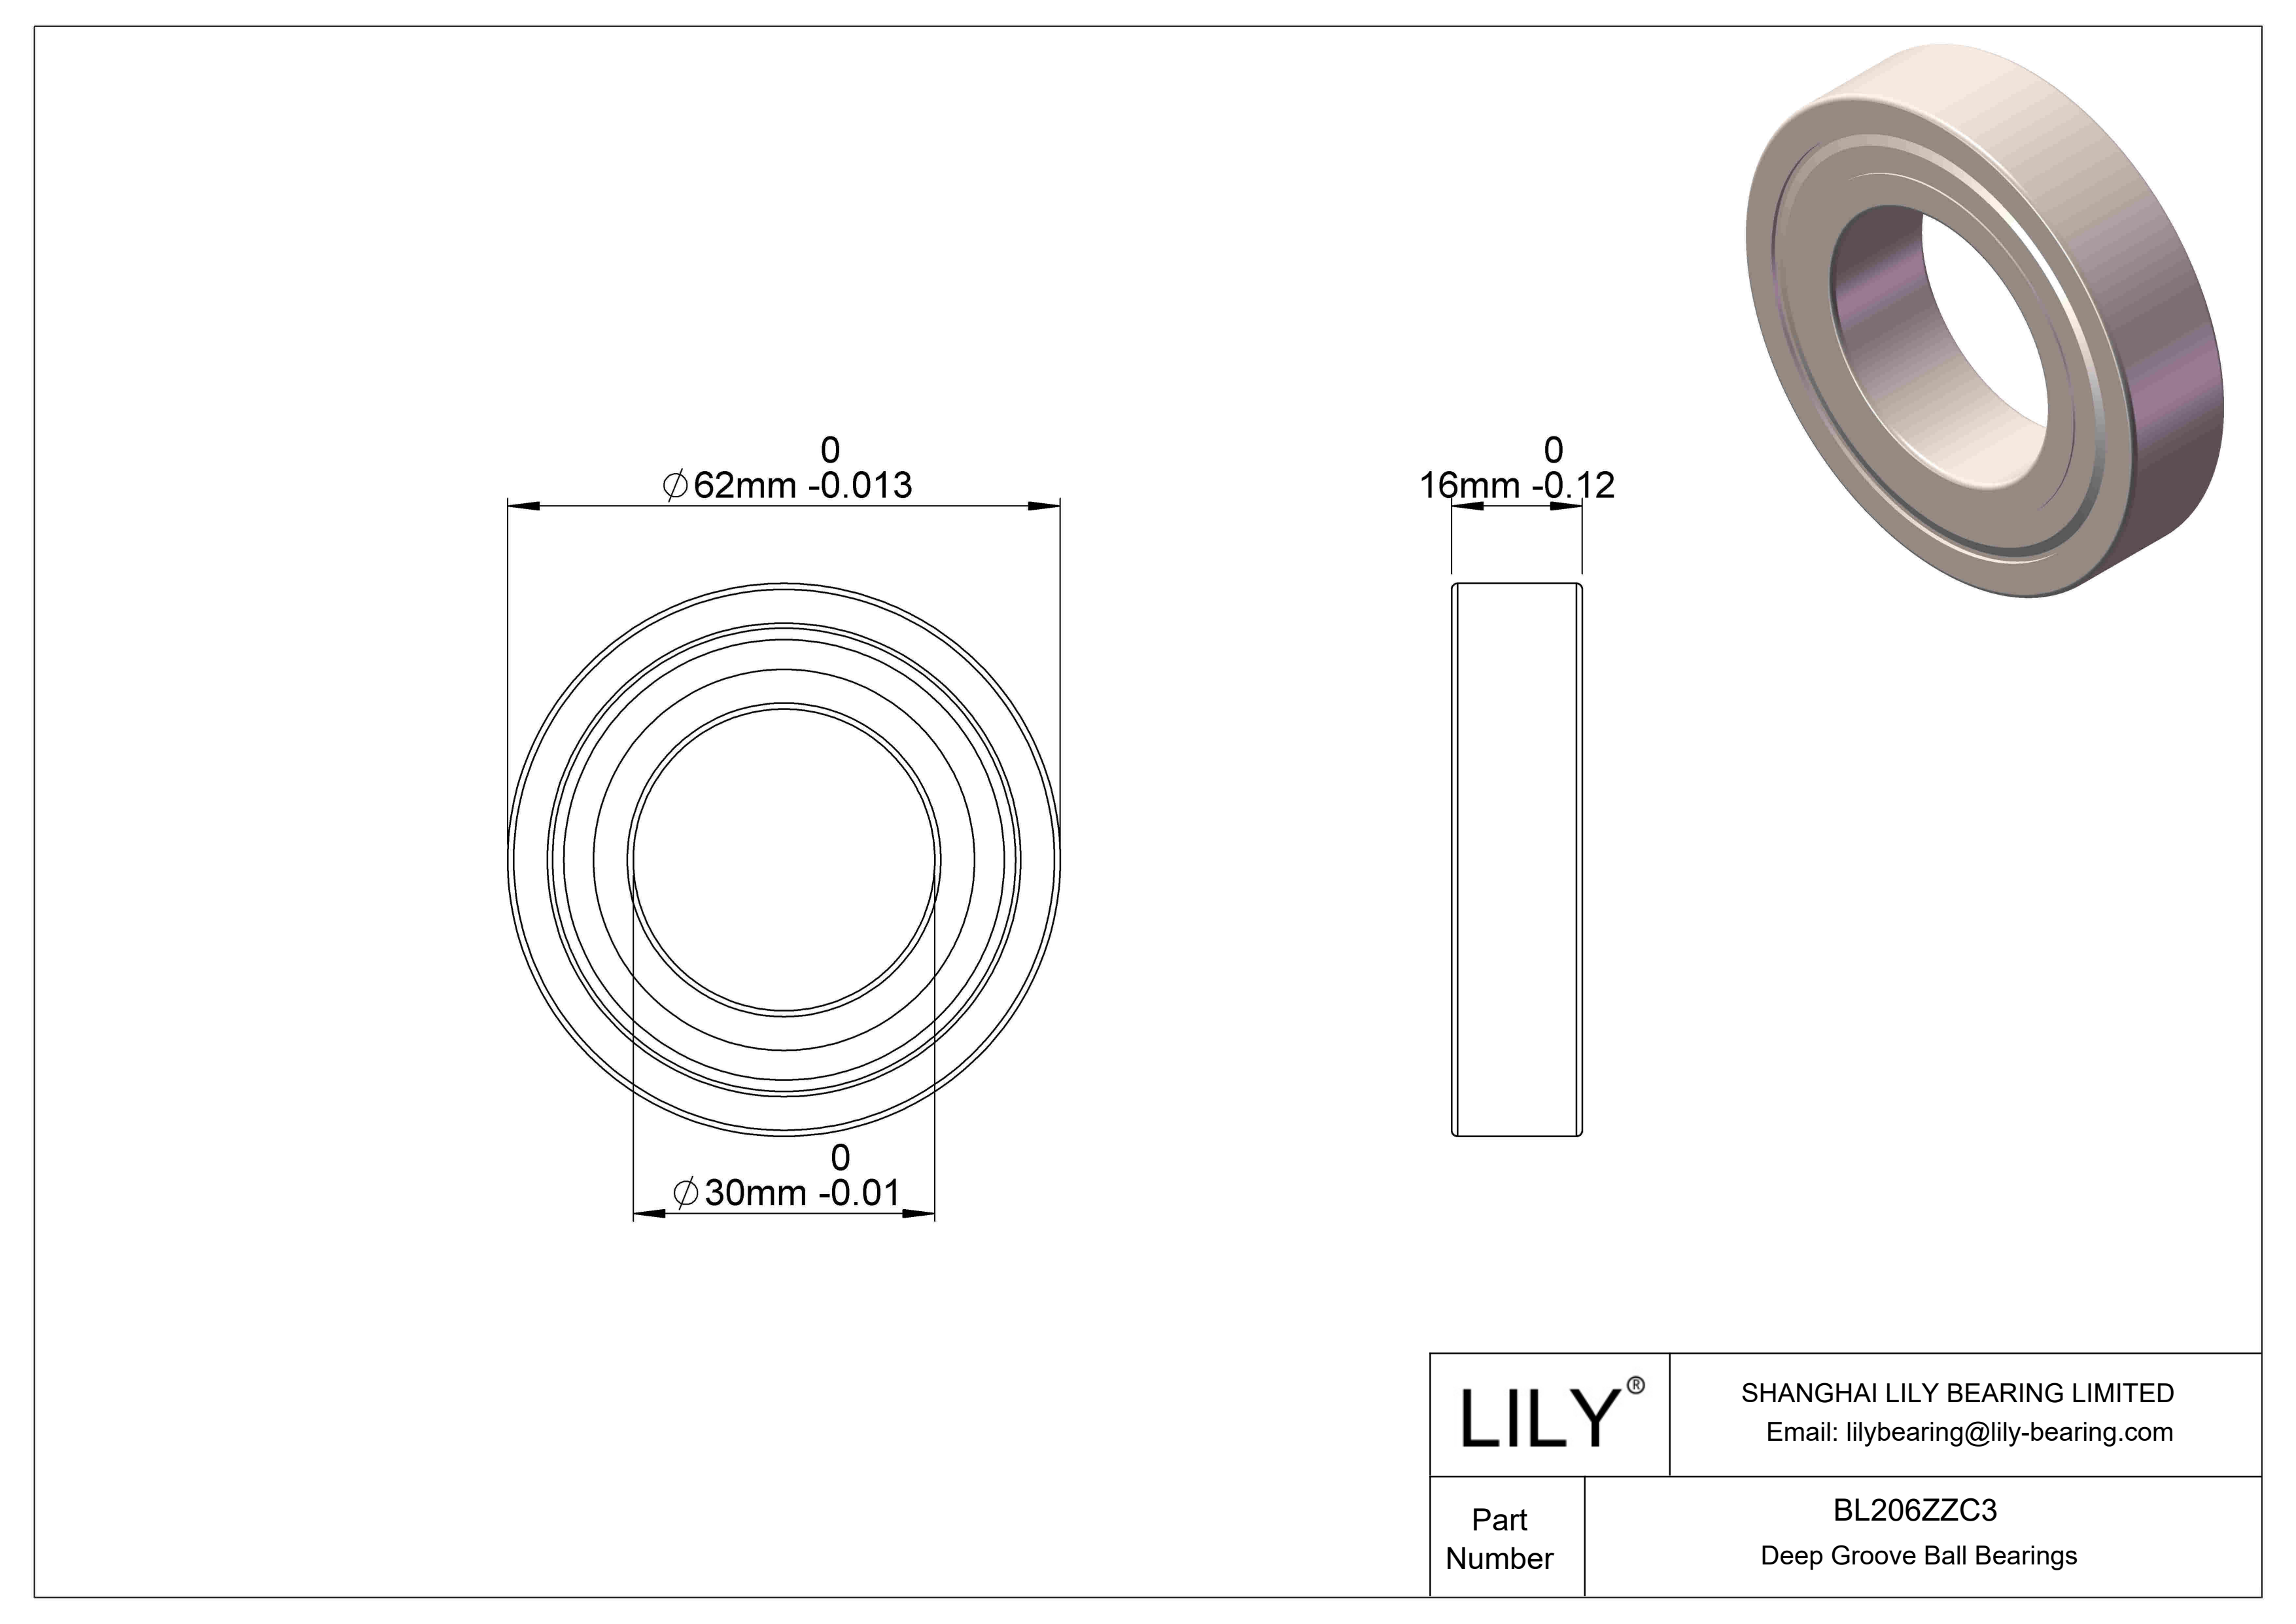 BL206ZZC3 General Deep Groove Ball Bearing cad drawing